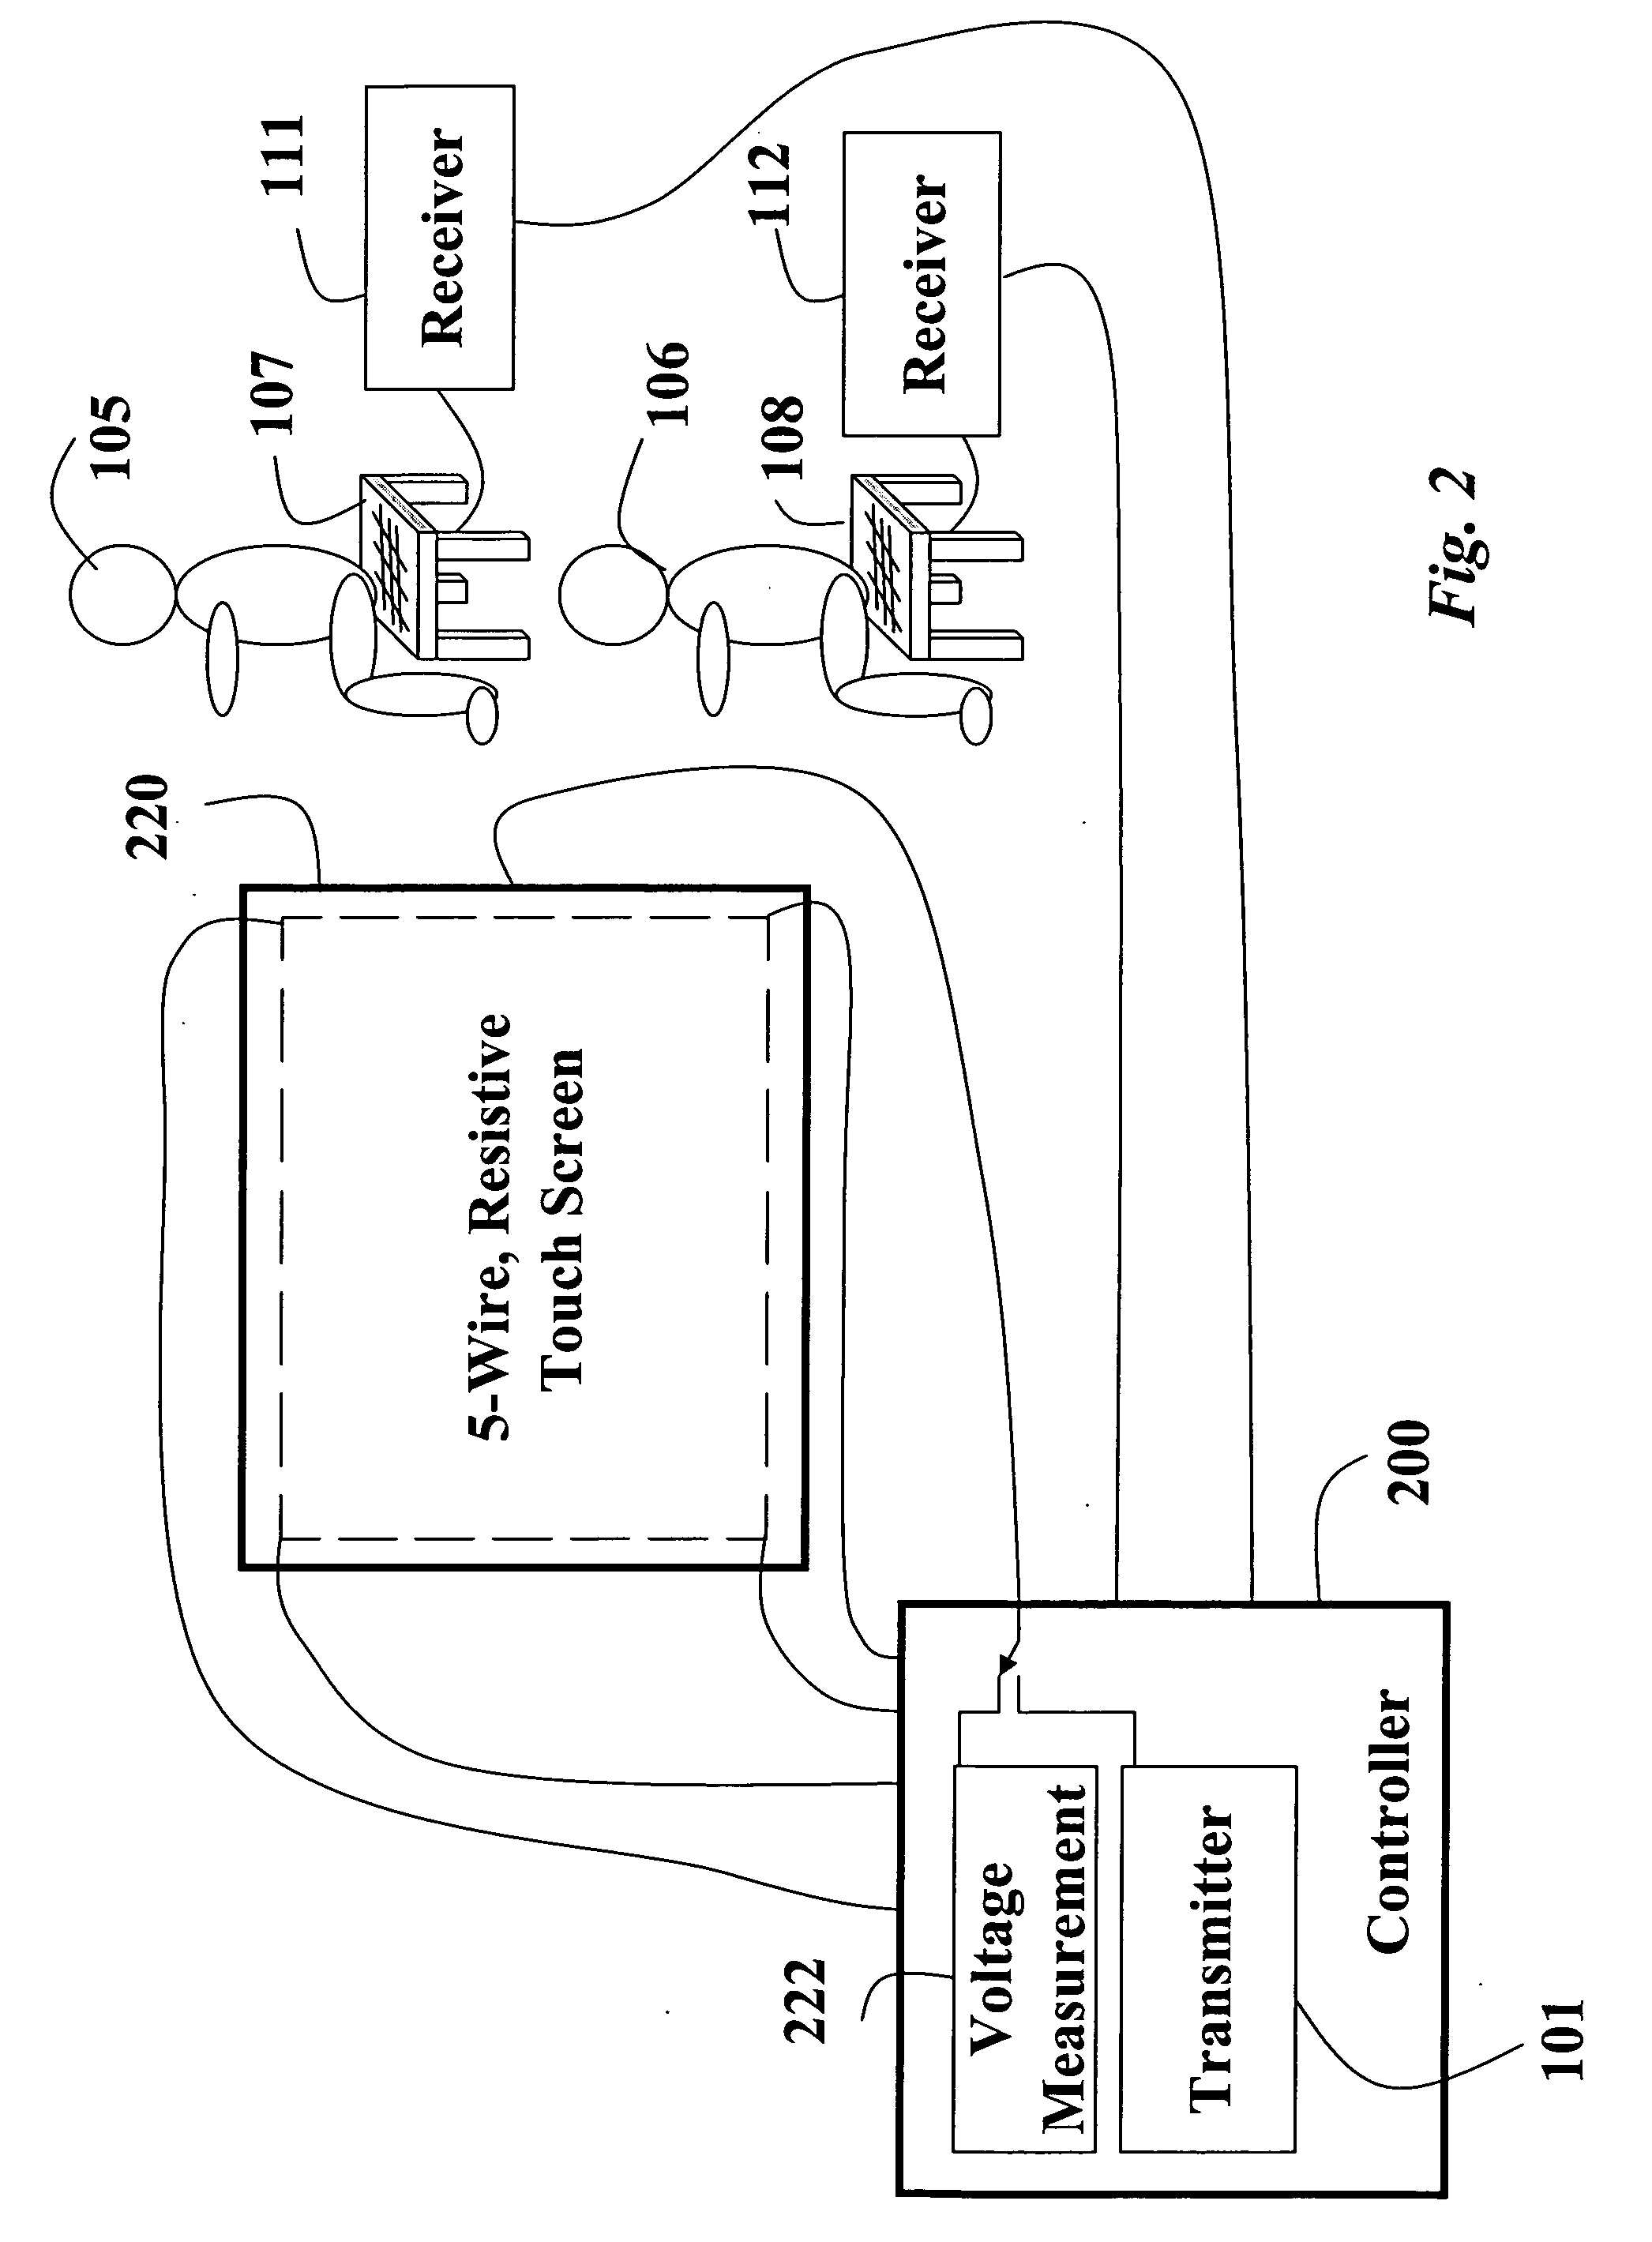 Control system and method for differentiating multiple users utilizing multi-view display devices